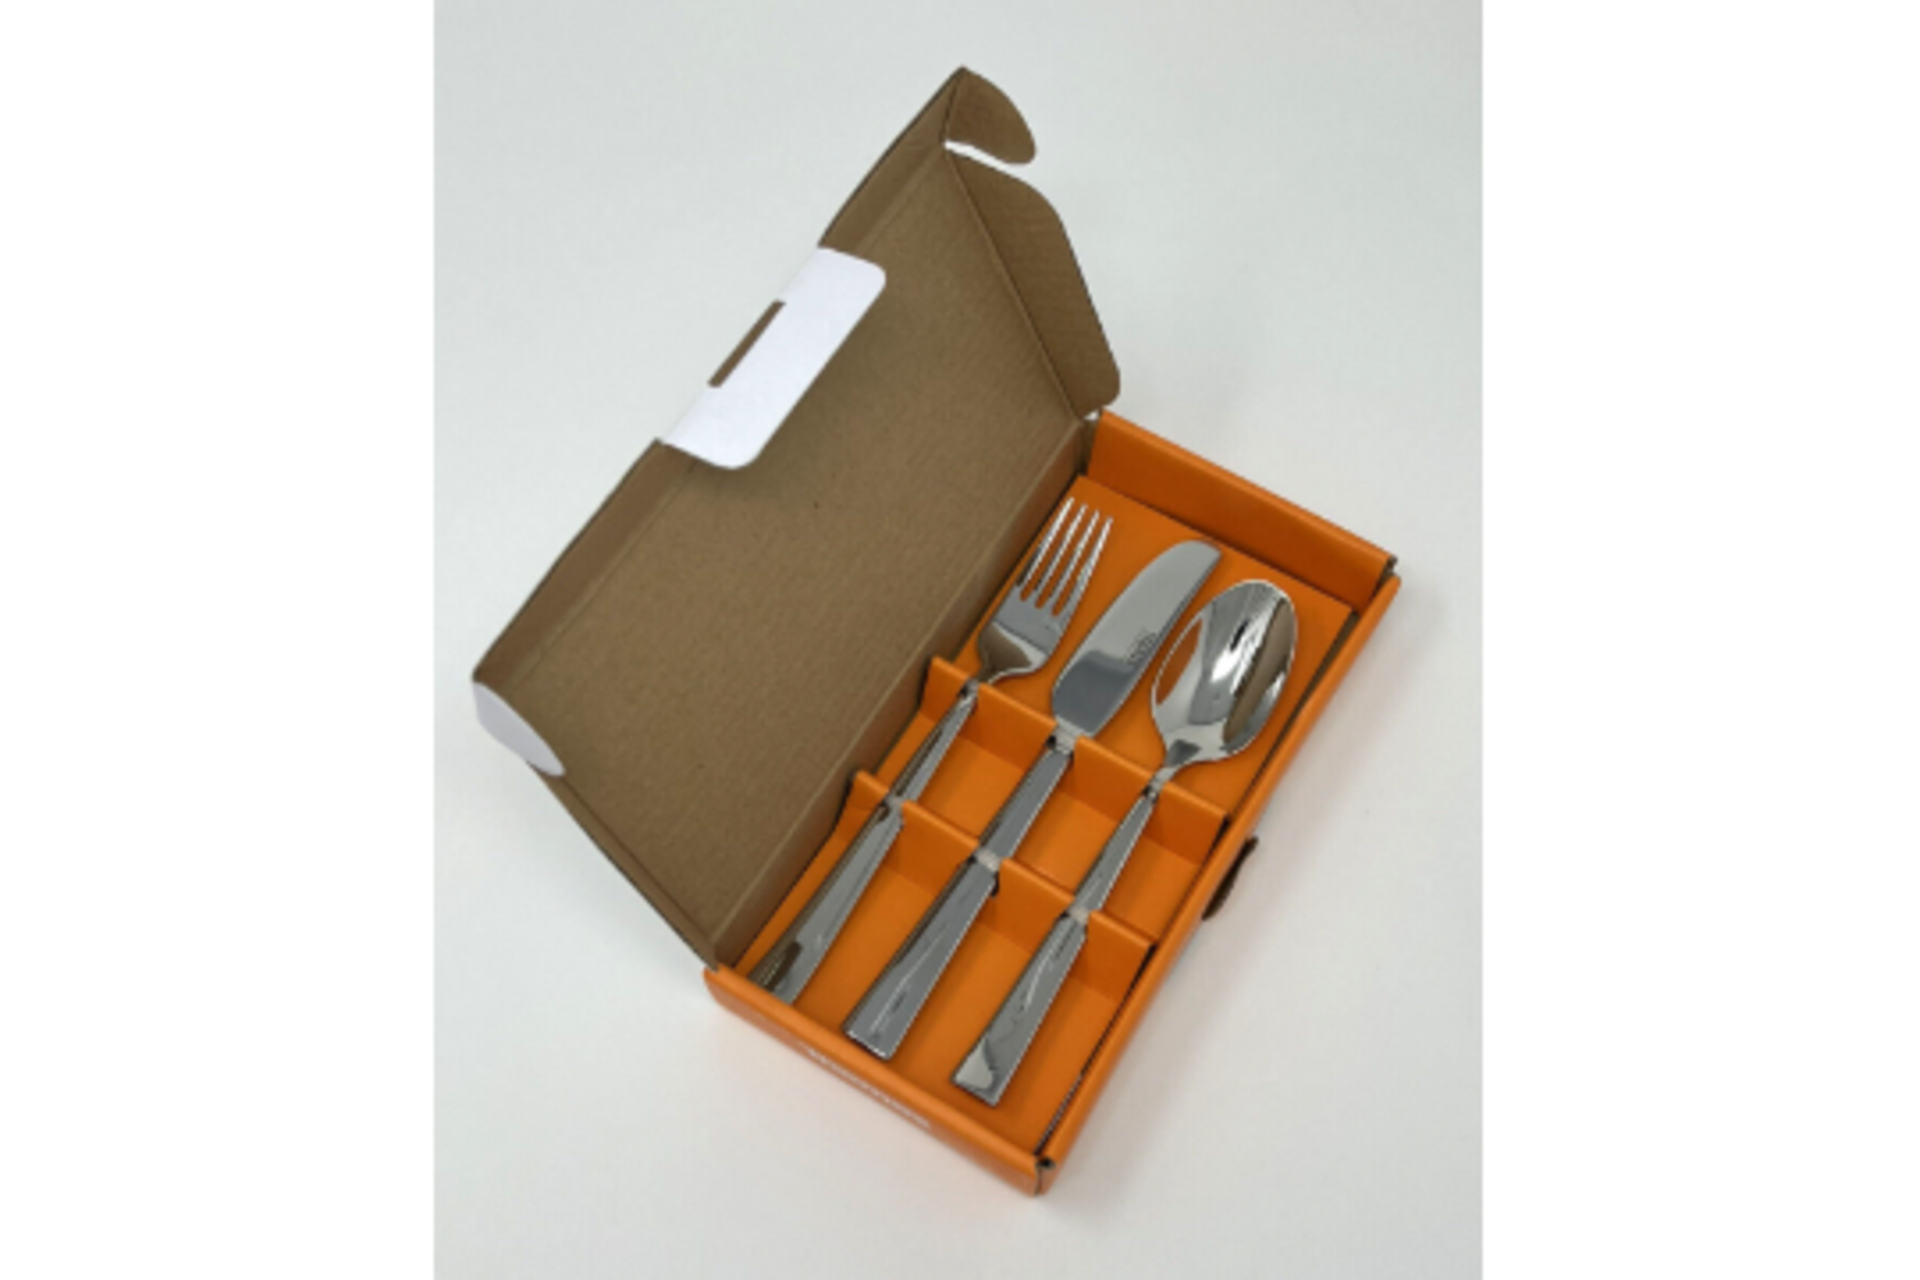 48 x New Boxed Sets of 3 Thomas Children’s Cutlery Set Stainless Steel Easy Grip Handle. RRP £24. - Image 2 of 8